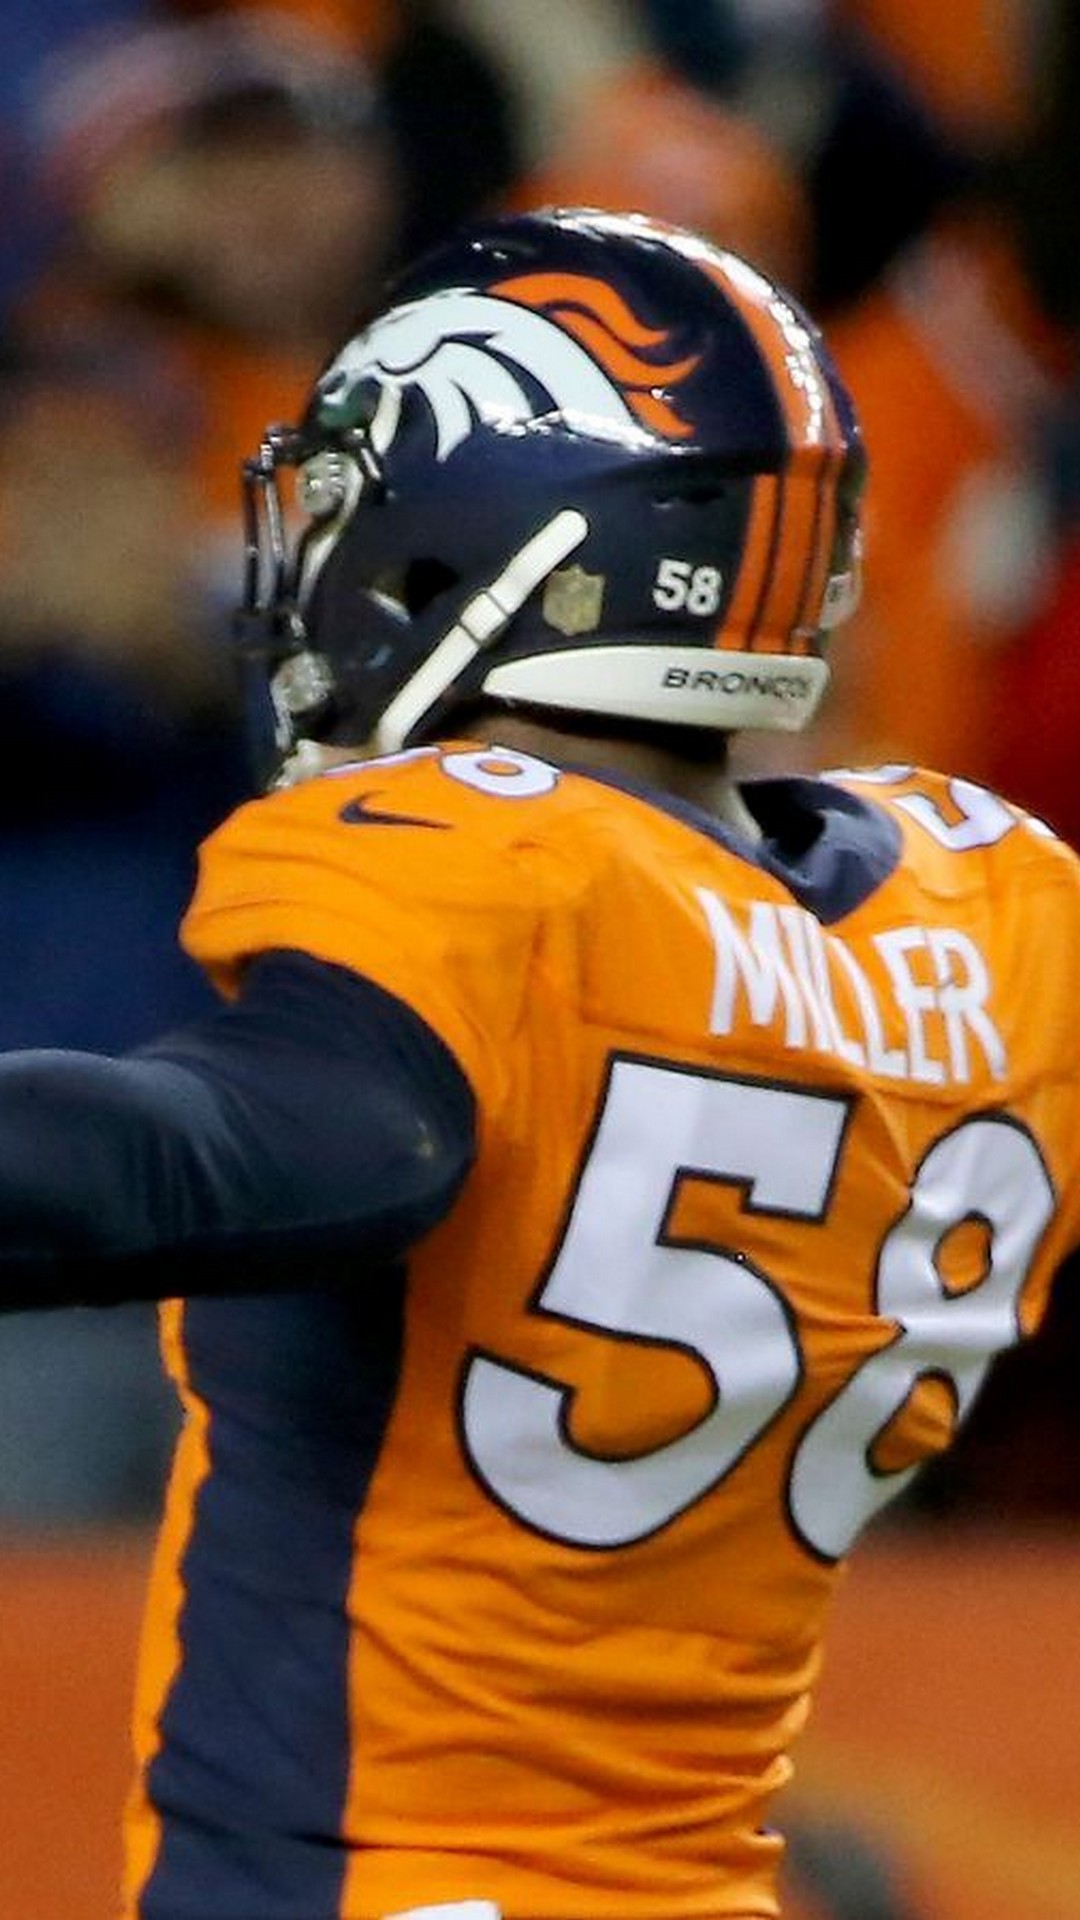 Von Miller Denver Broncos iPhone Wallpapers with high-resolution 1080x1920 pixel. You can use this wallpaper for your Mac or Windows Desktop Background, iPhone, Android or Tablet and another Smartphone device